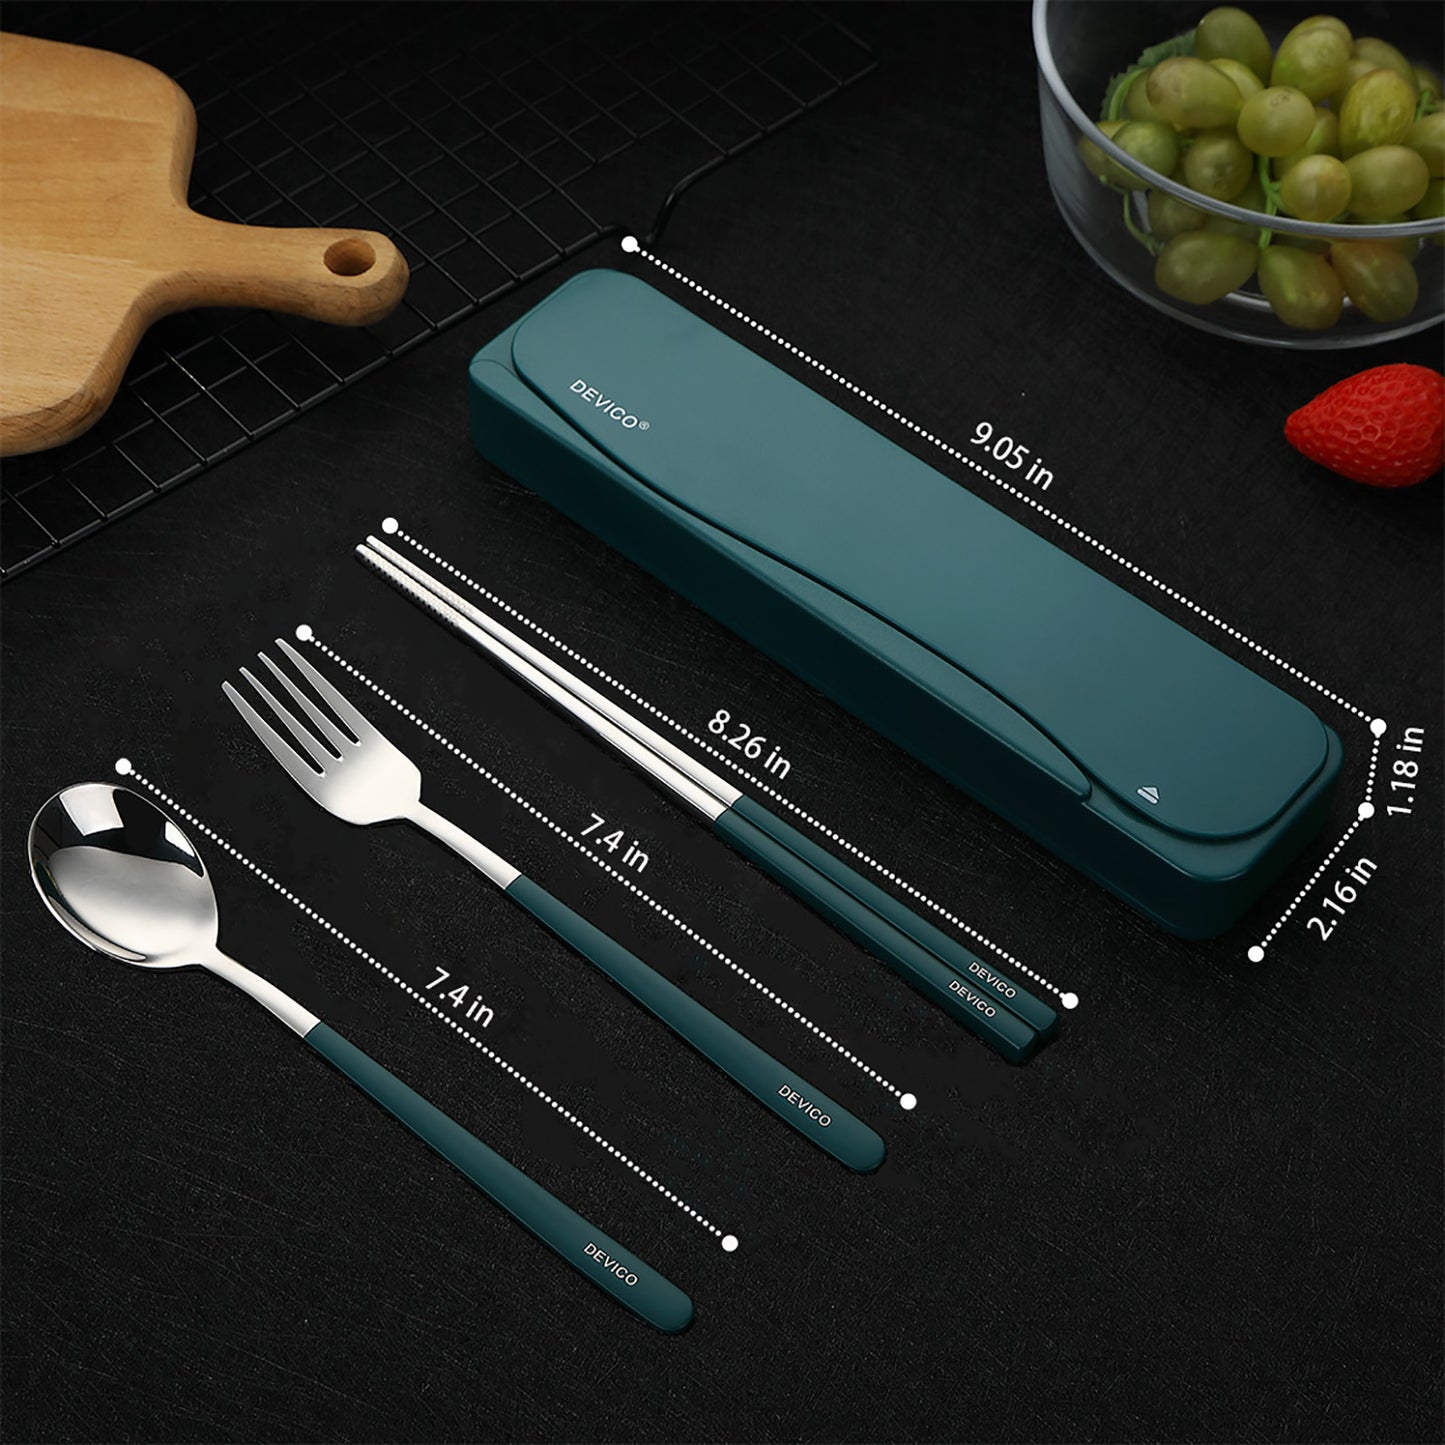 DEVICO Travel Utensils, 18/8 Stainless Steel Portable Reusable Camping Silverware Cutlery Flatware Set, 4-Piece Include Fork Spoon Chopsticks with Case (Dark Green)